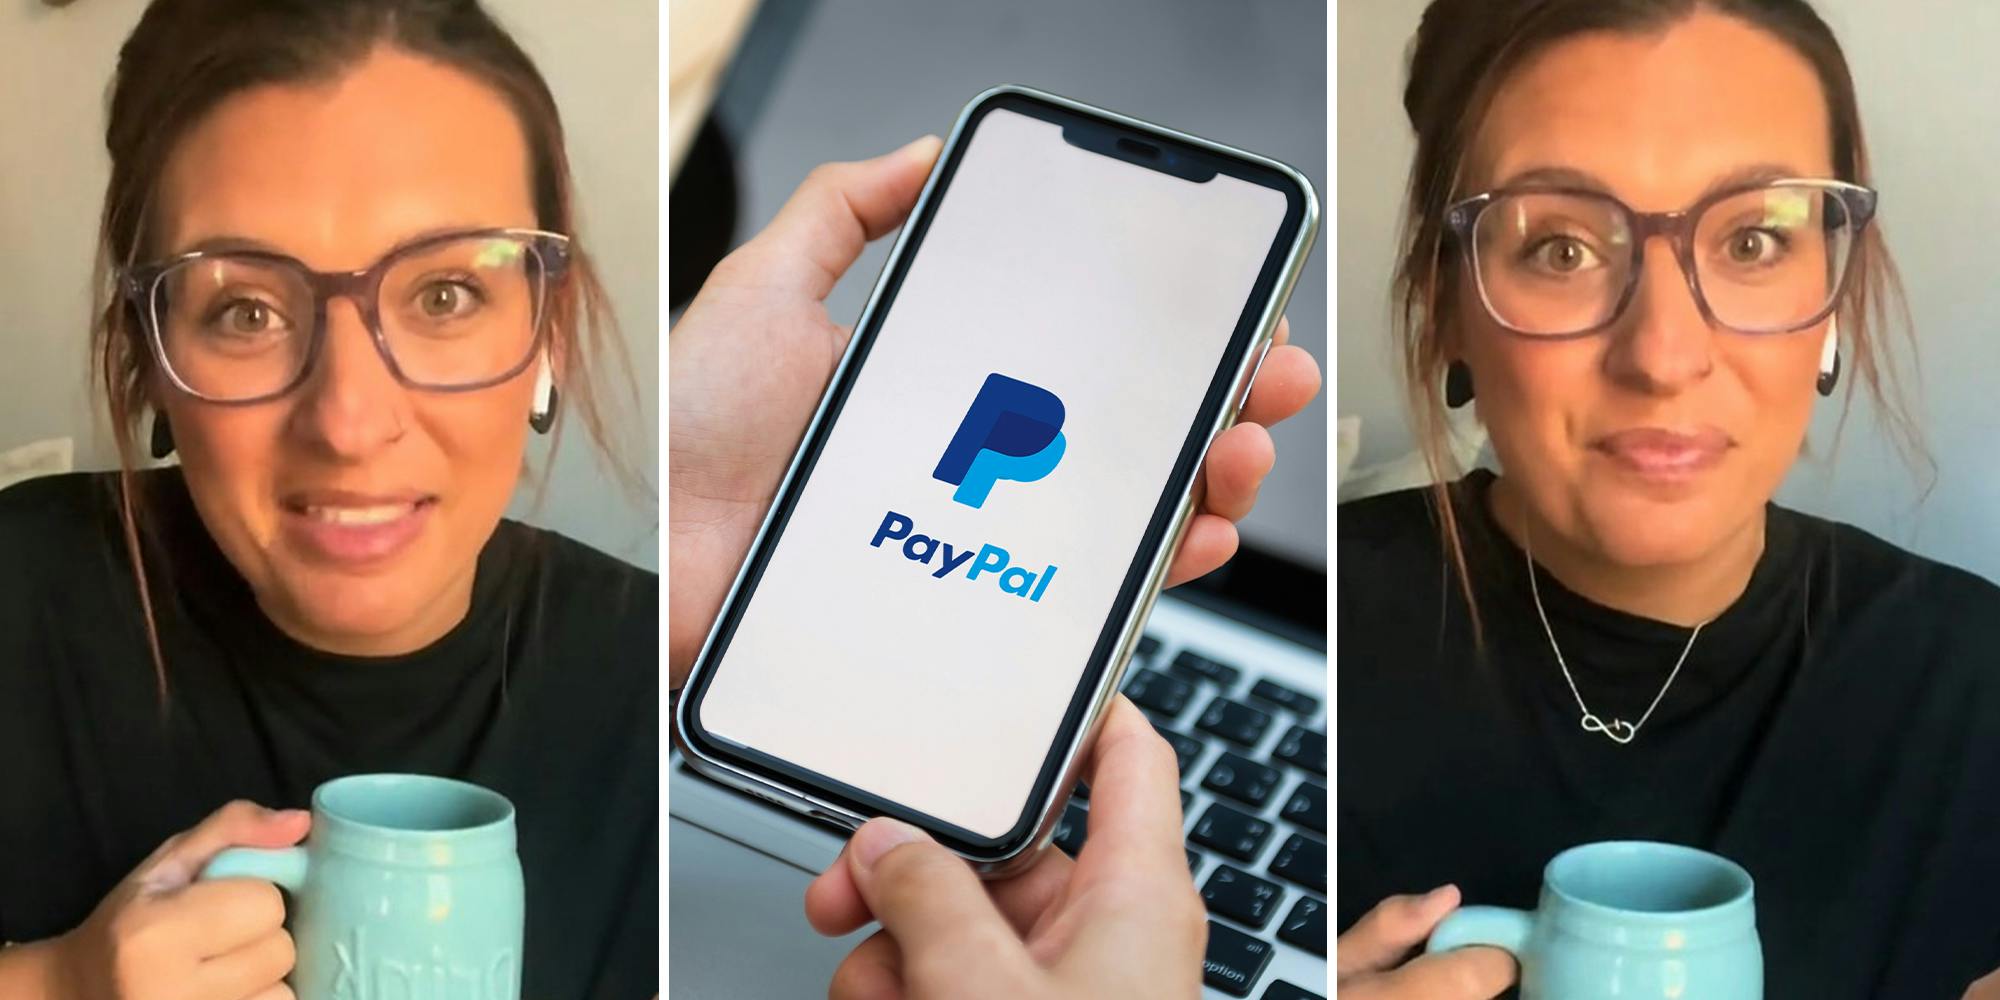 ‘I didn’t think anything of it’: PayPal customer realizes she’s been quietly charged $72 a month for years